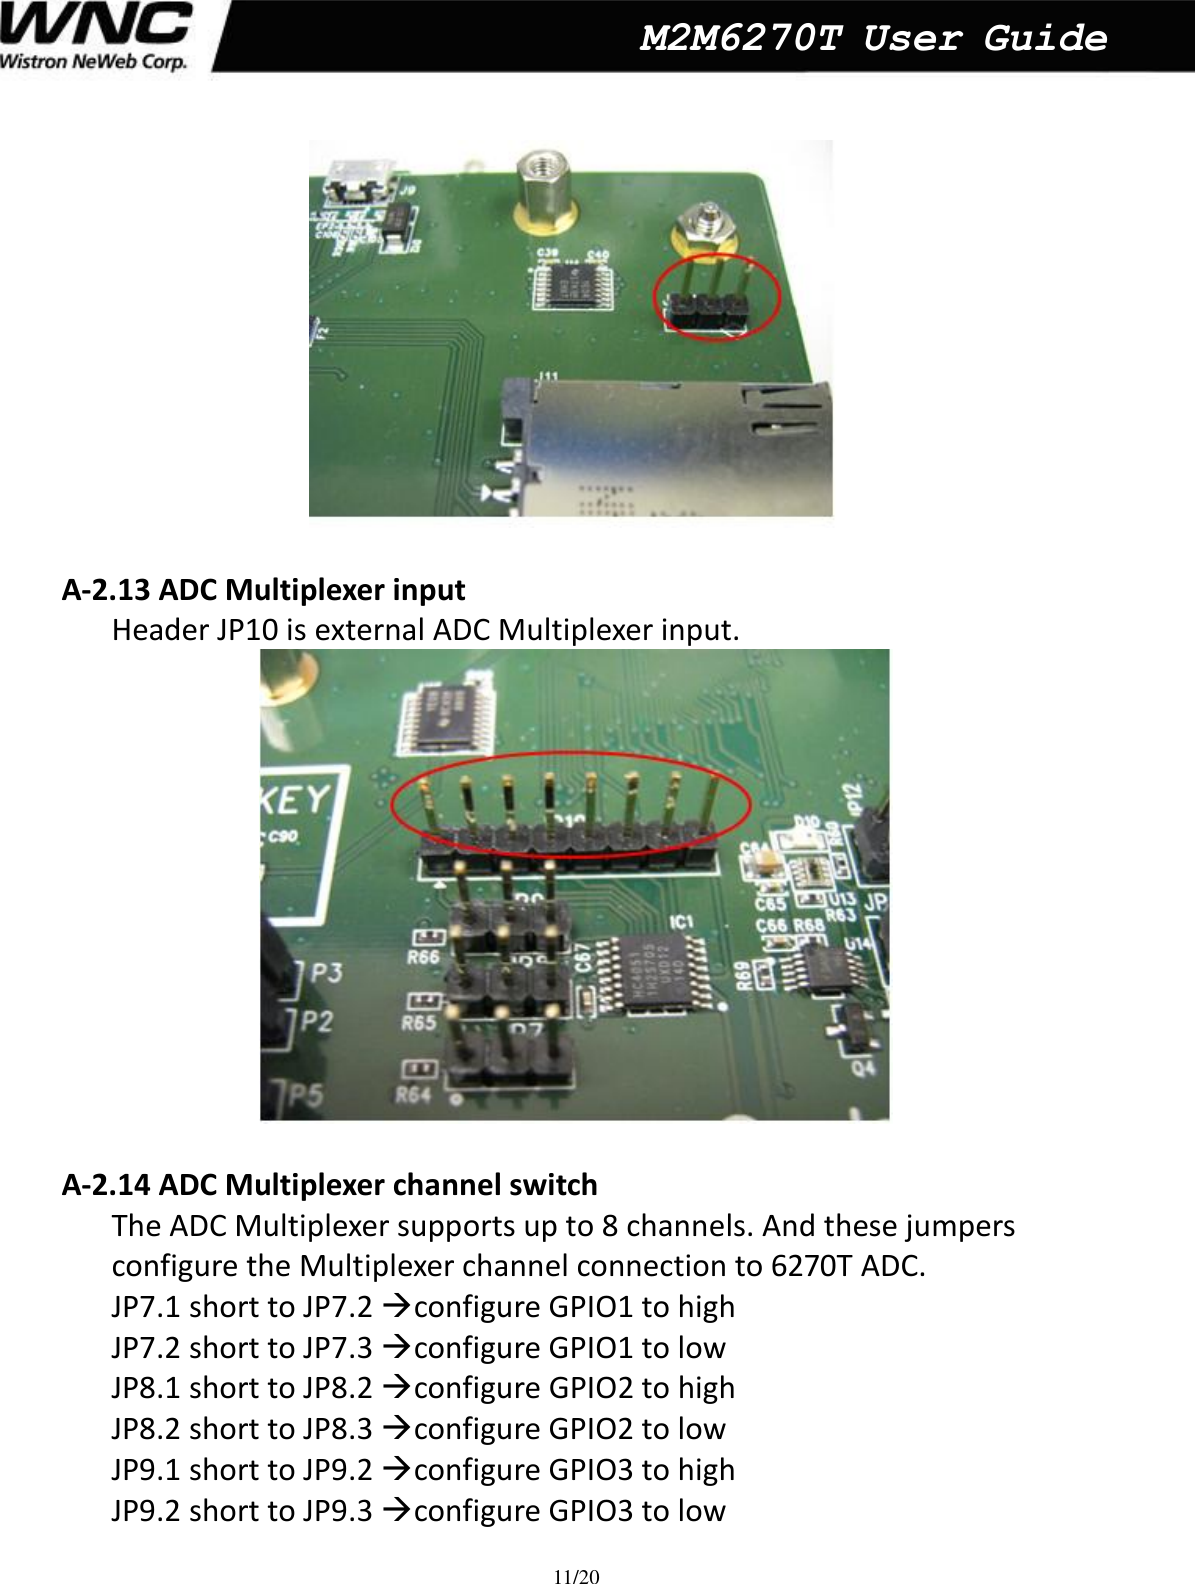  11/20  M2M6270T User Guide   A-2.13 ADC Multiplexer input   Header JP10 is external ADC Multiplexer input.     A-2.14 ADC Multiplexer channel switch   The ADC Multiplexer supports up to 8 channels. And these jumpers   configure the Multiplexer channel connection to 6270T ADC. JP7.1 short to JP7.2 configure GPIO1 to high   JP7.2 short to JP7.3 configure GPIO1 to low JP8.1 short to JP8.2 configure GPIO2 to high   JP8.2 short to JP8.3 configure GPIO2 to low JP9.1 short to JP9.2 configure GPIO3 to high   JP9.2 short to JP9.3 configure GPIO3 to low   